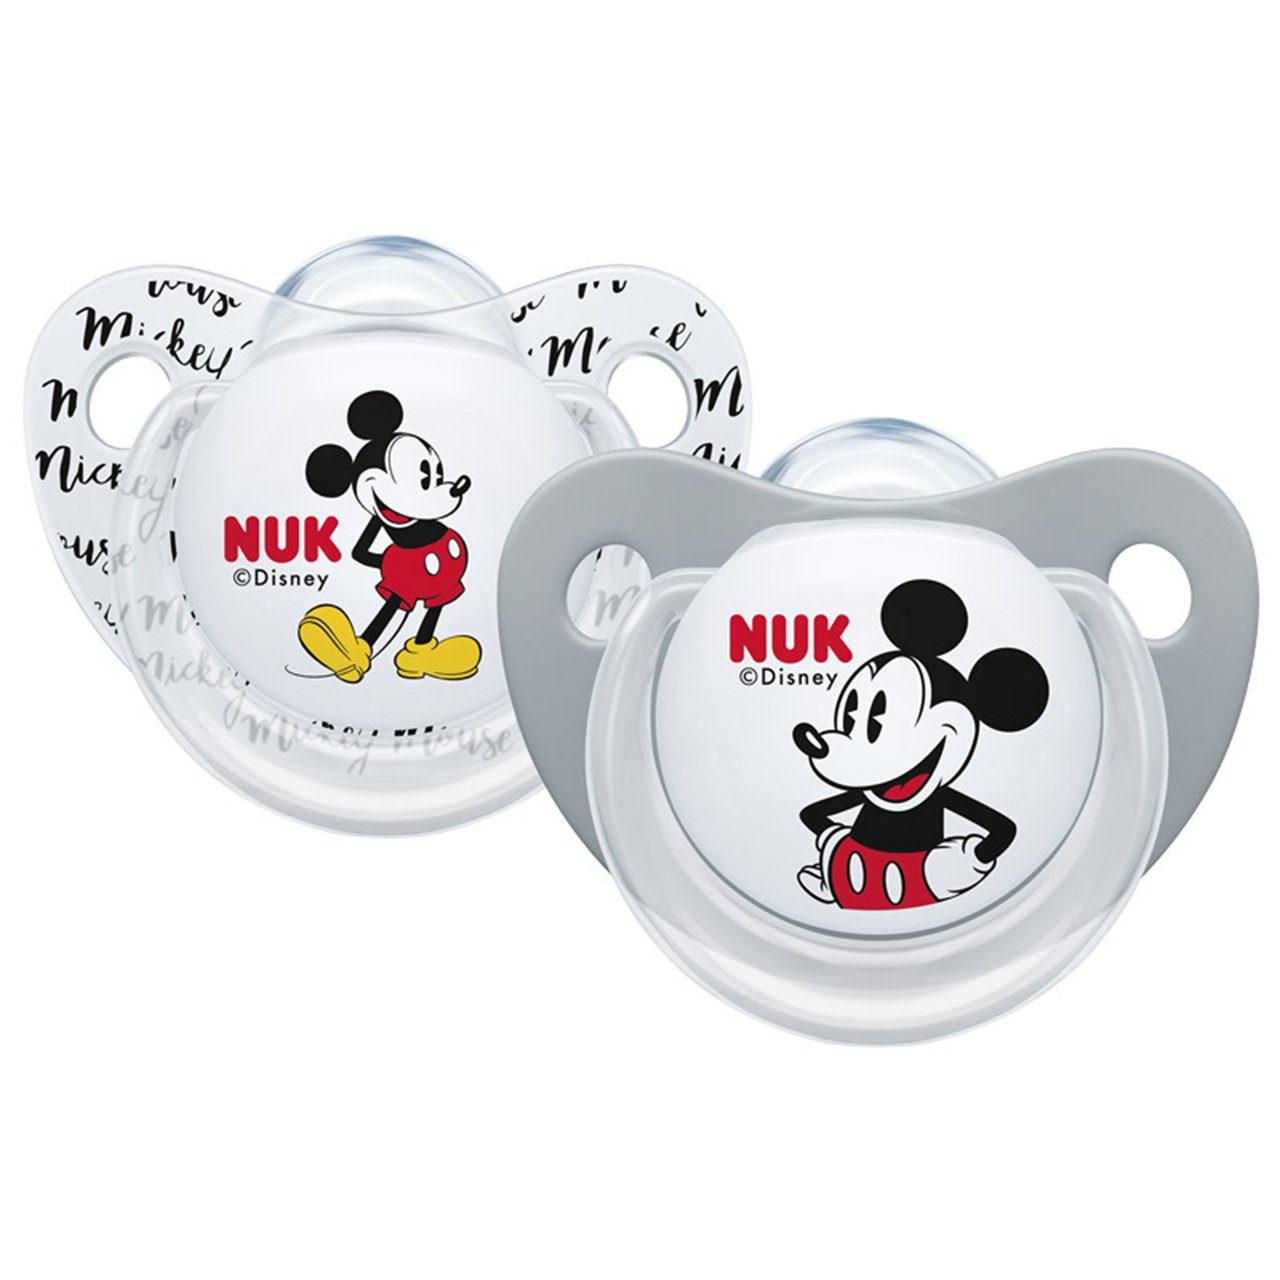 Nuk Disney Mickey And Minnie Twin Pack Soother Silicone Teat Size 1 0-6 Months